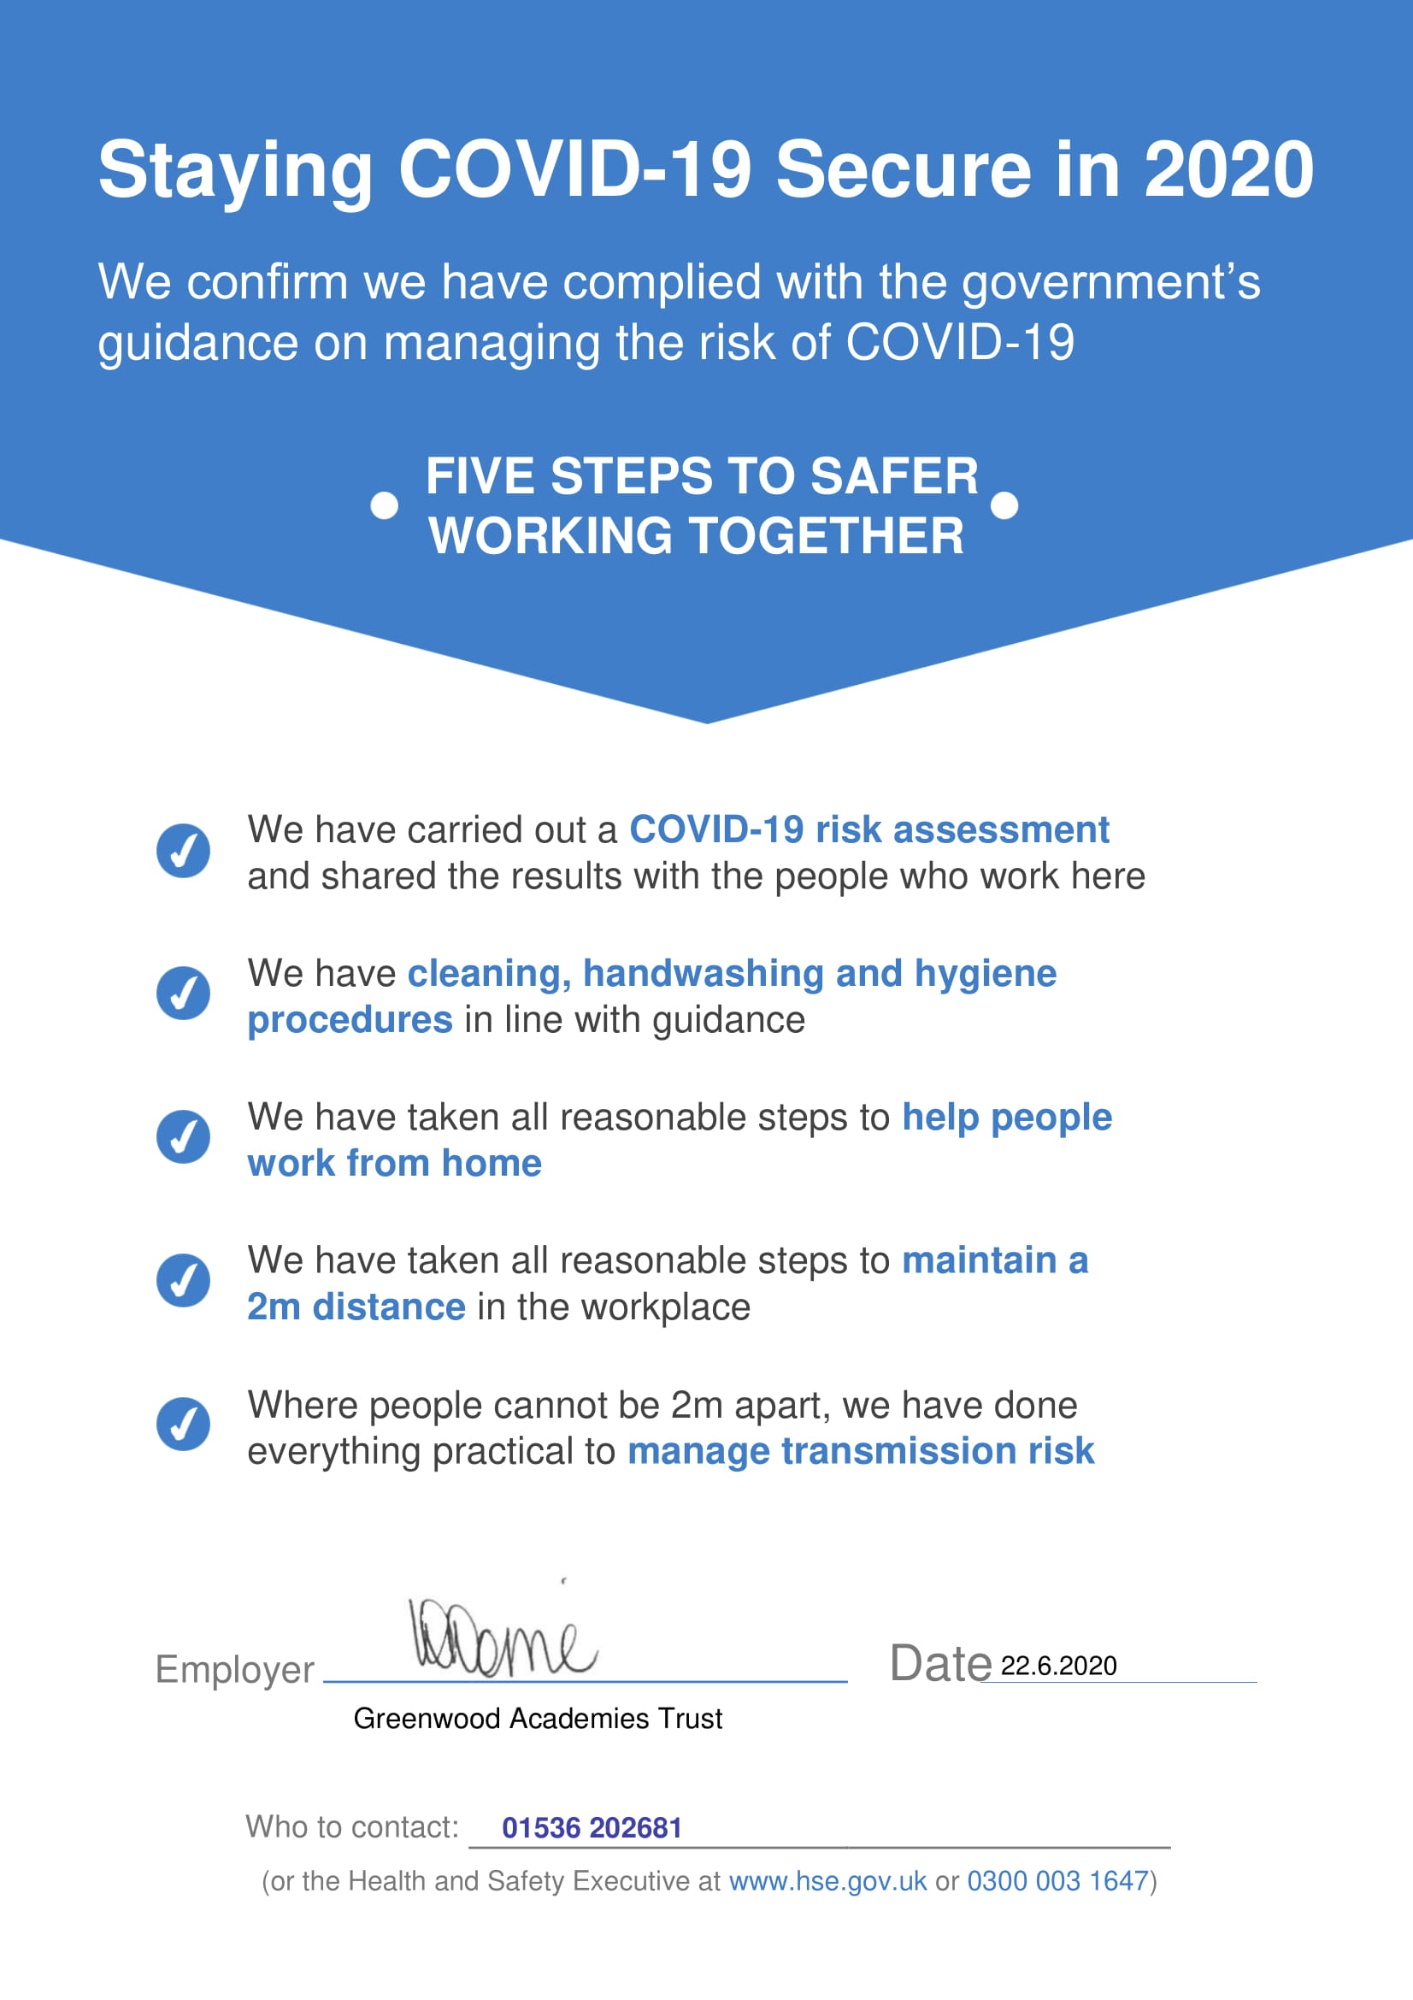 Staying Covid - 19 Secure in 2020